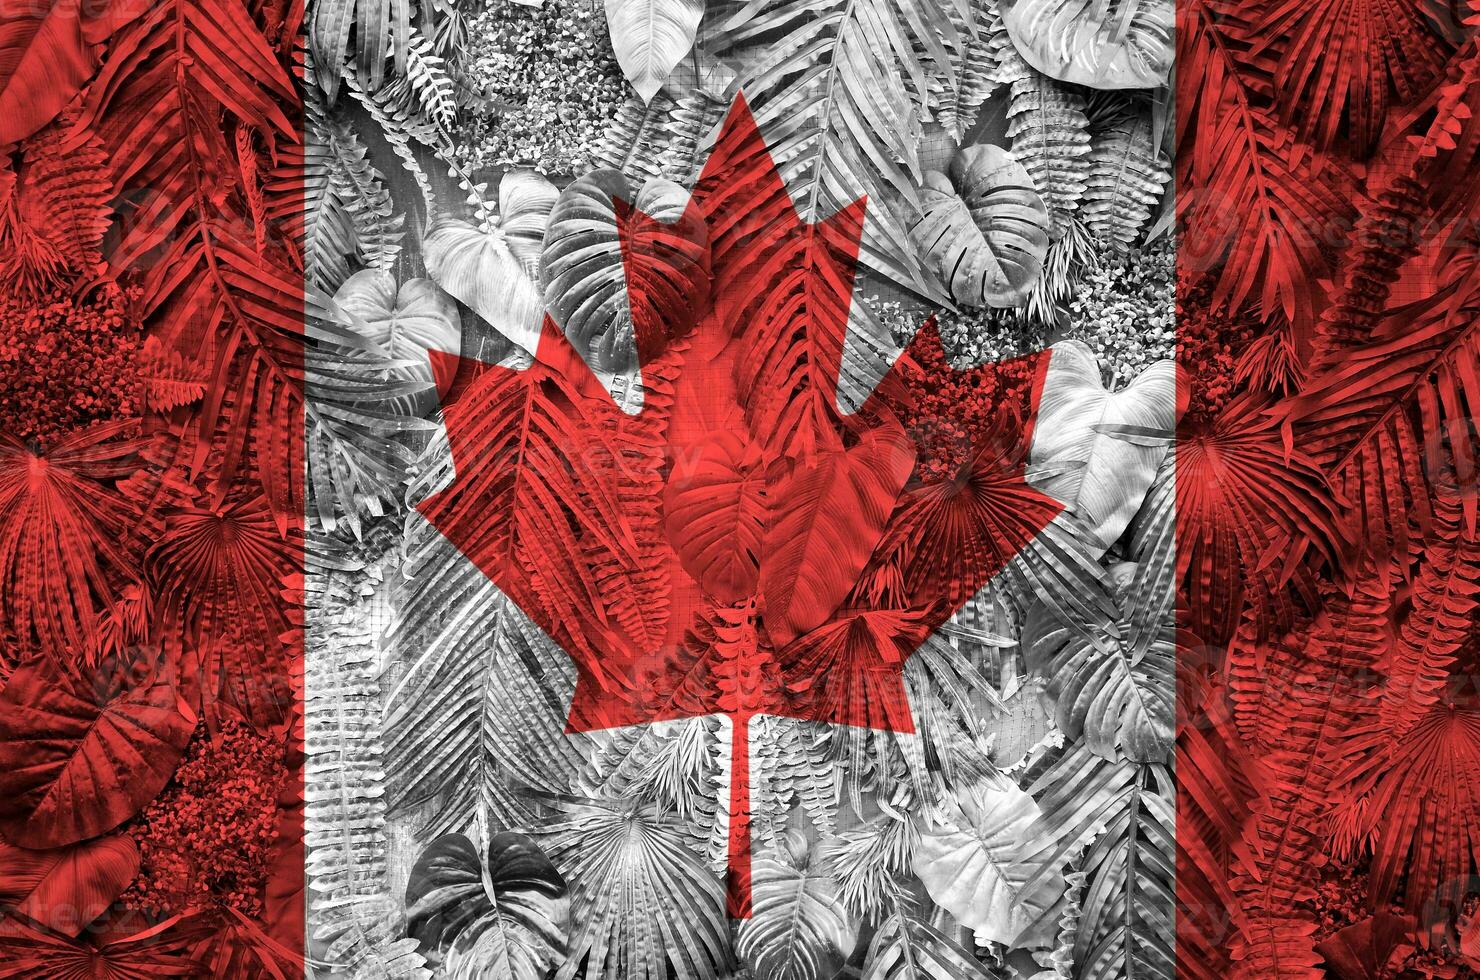 Canada flag depicted on many leafs of monstera palm trees. Trendy fashionable backdrop photo